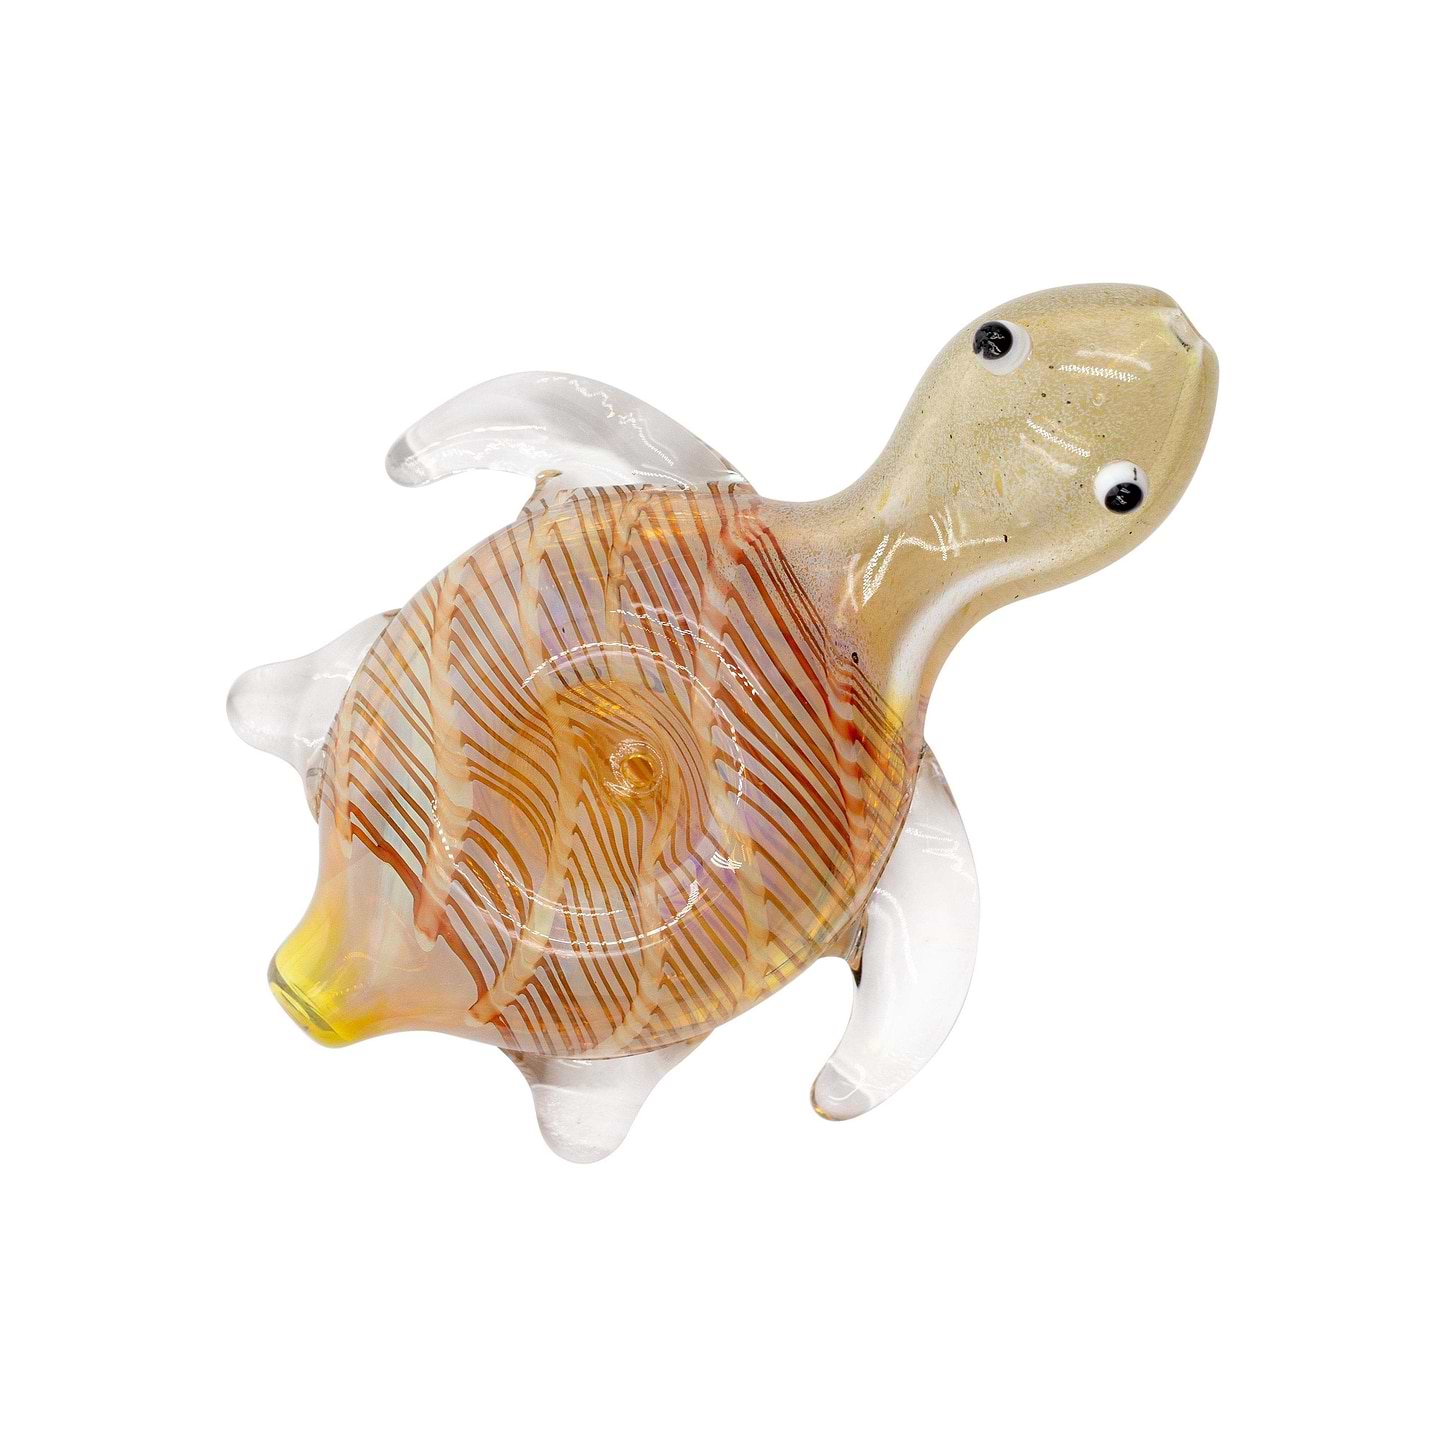 4.5-inch glass hand pipe smoking device with look and shape of a turtle and cute swirl texture